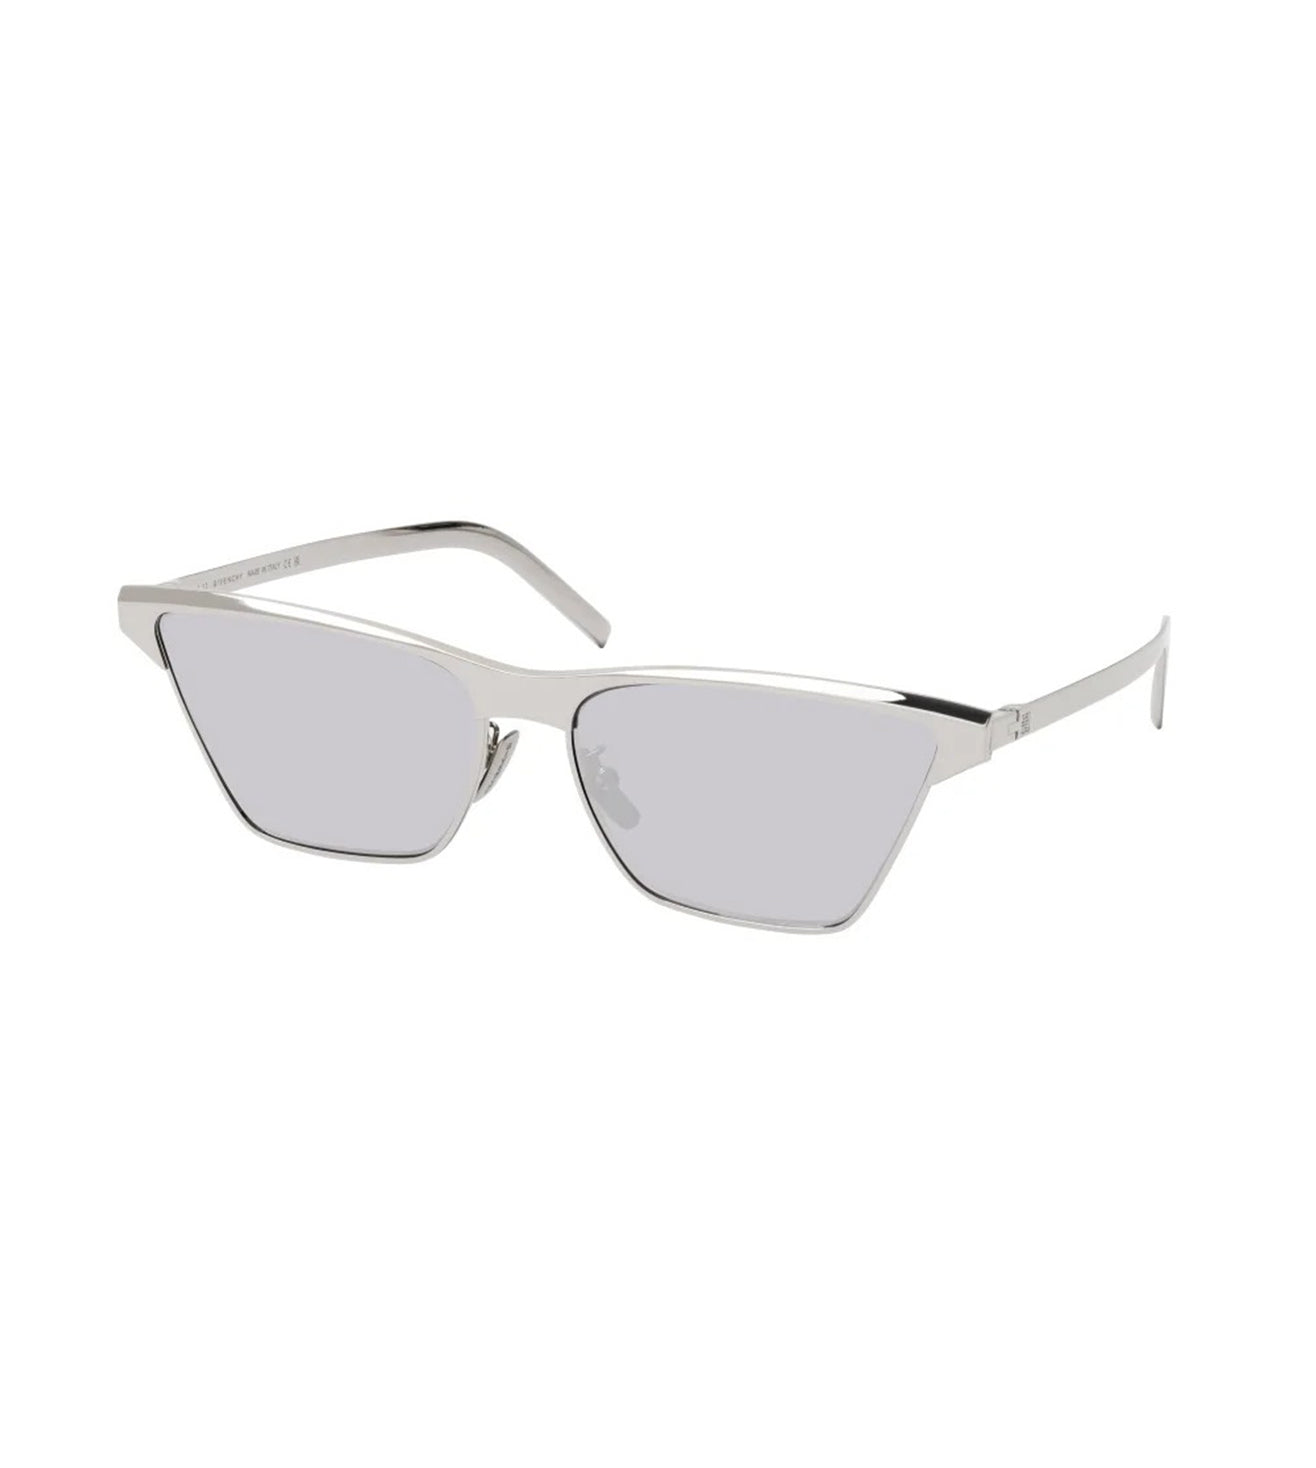 Givenchy Women's Grey Butterfly Sunglasses